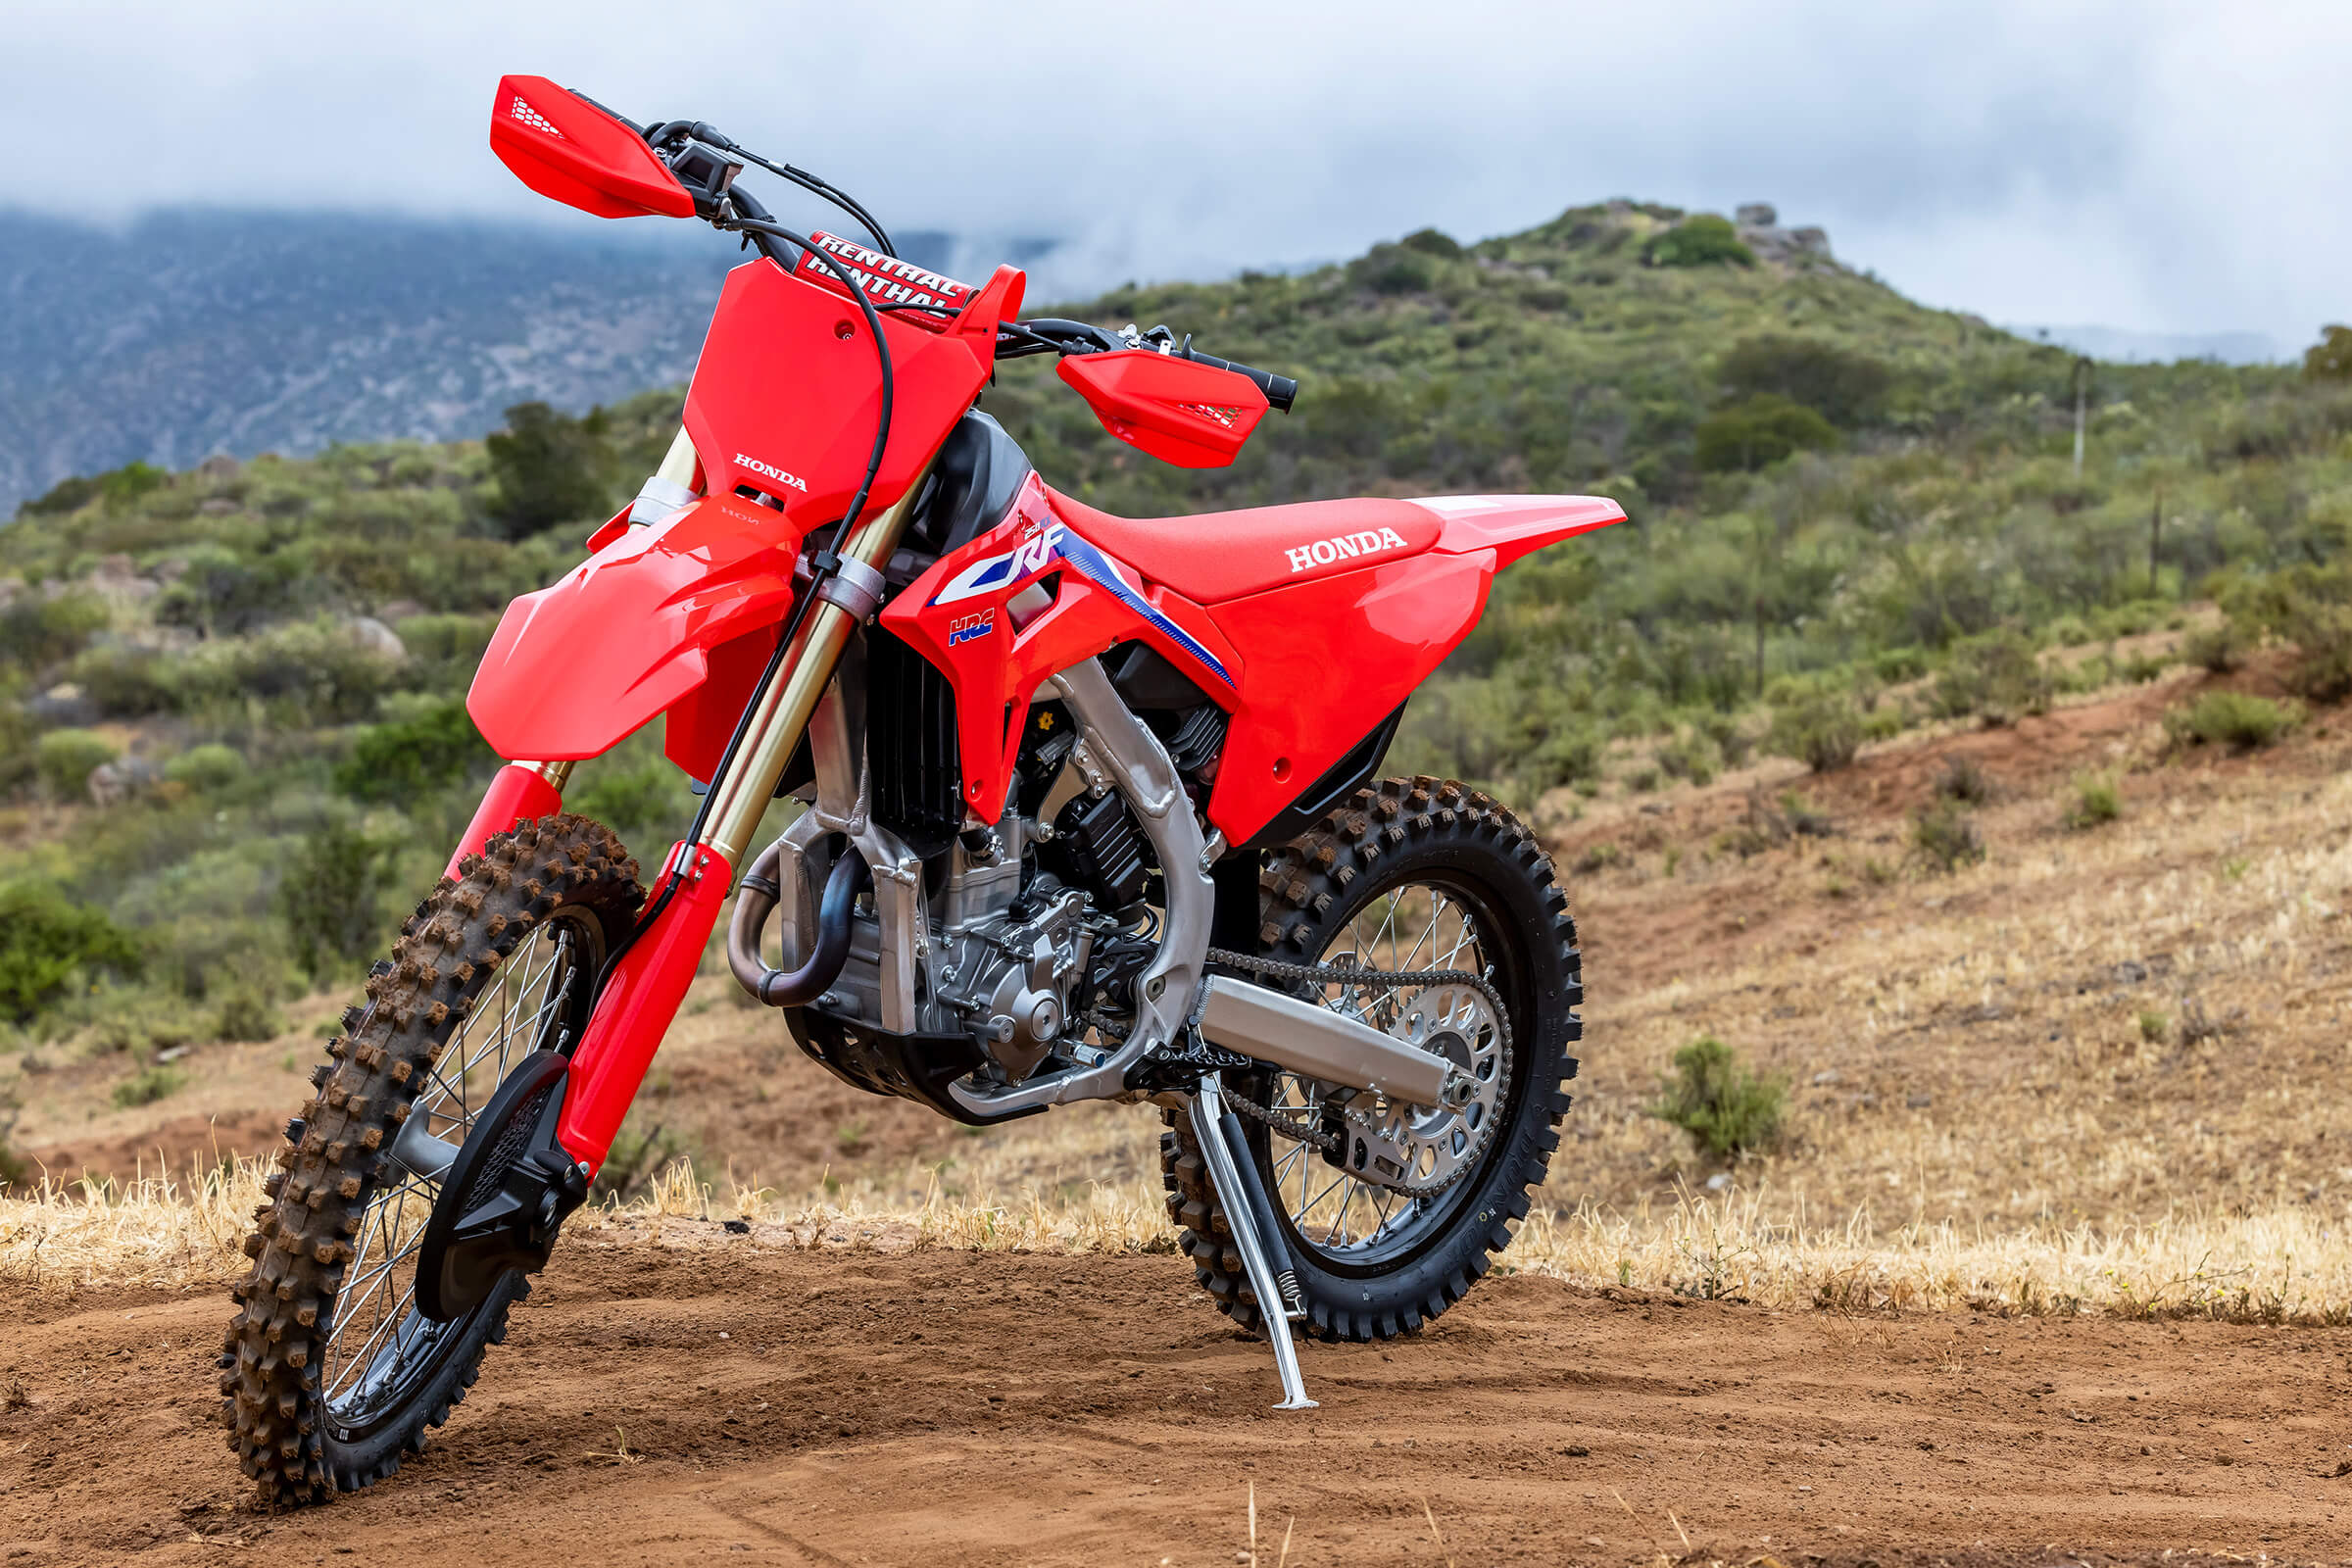 A side view of the 2022 Honda CRF250RX